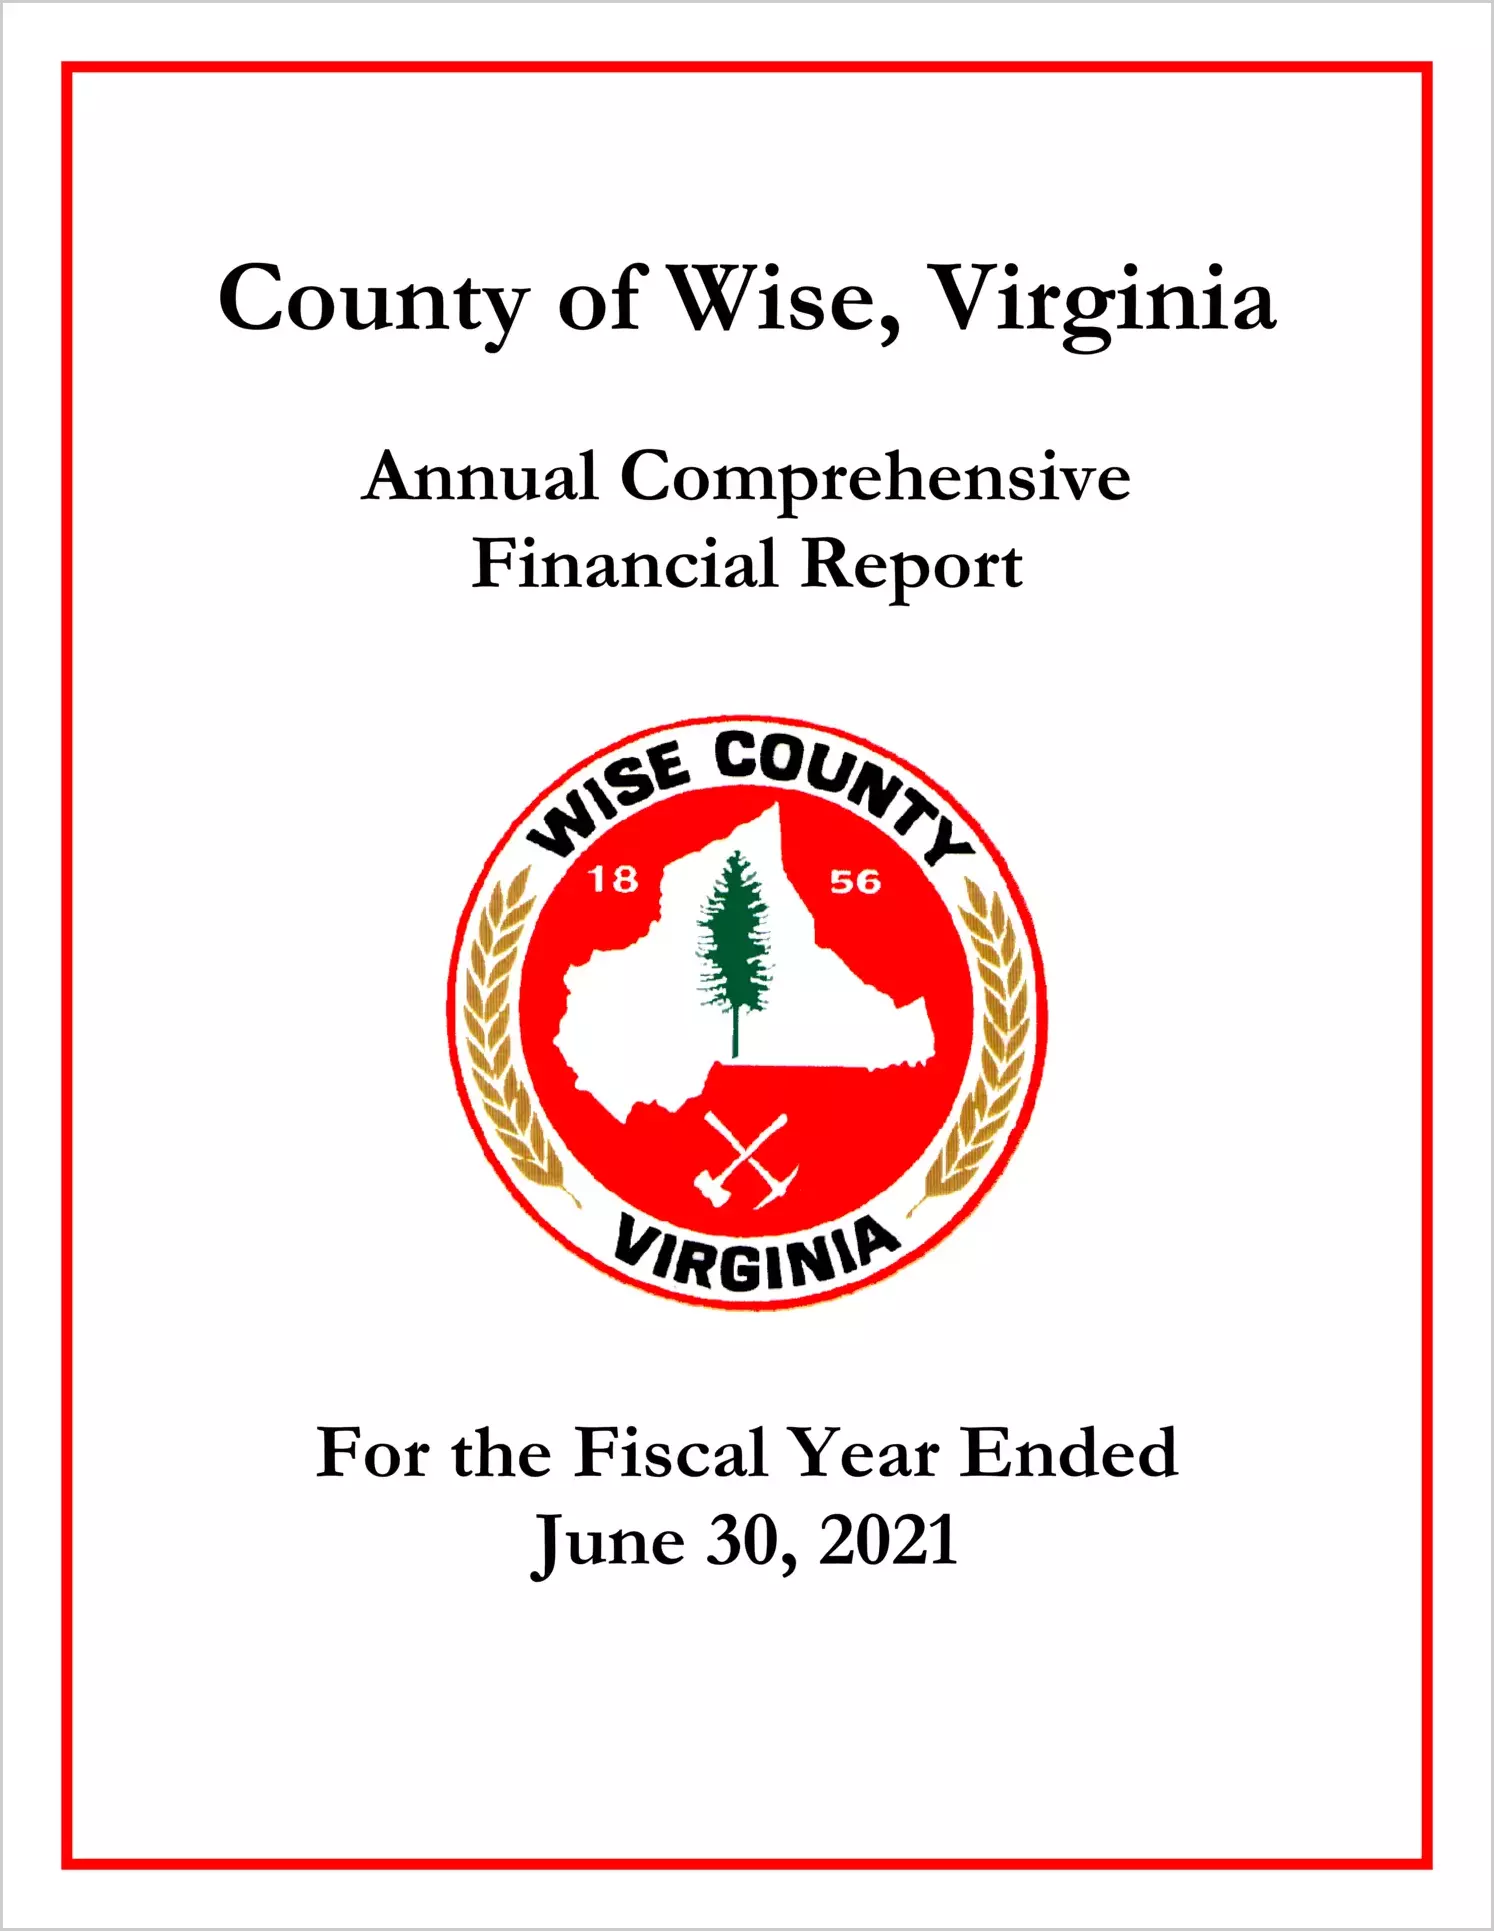 2021 Annual Financial Report for County of Wise